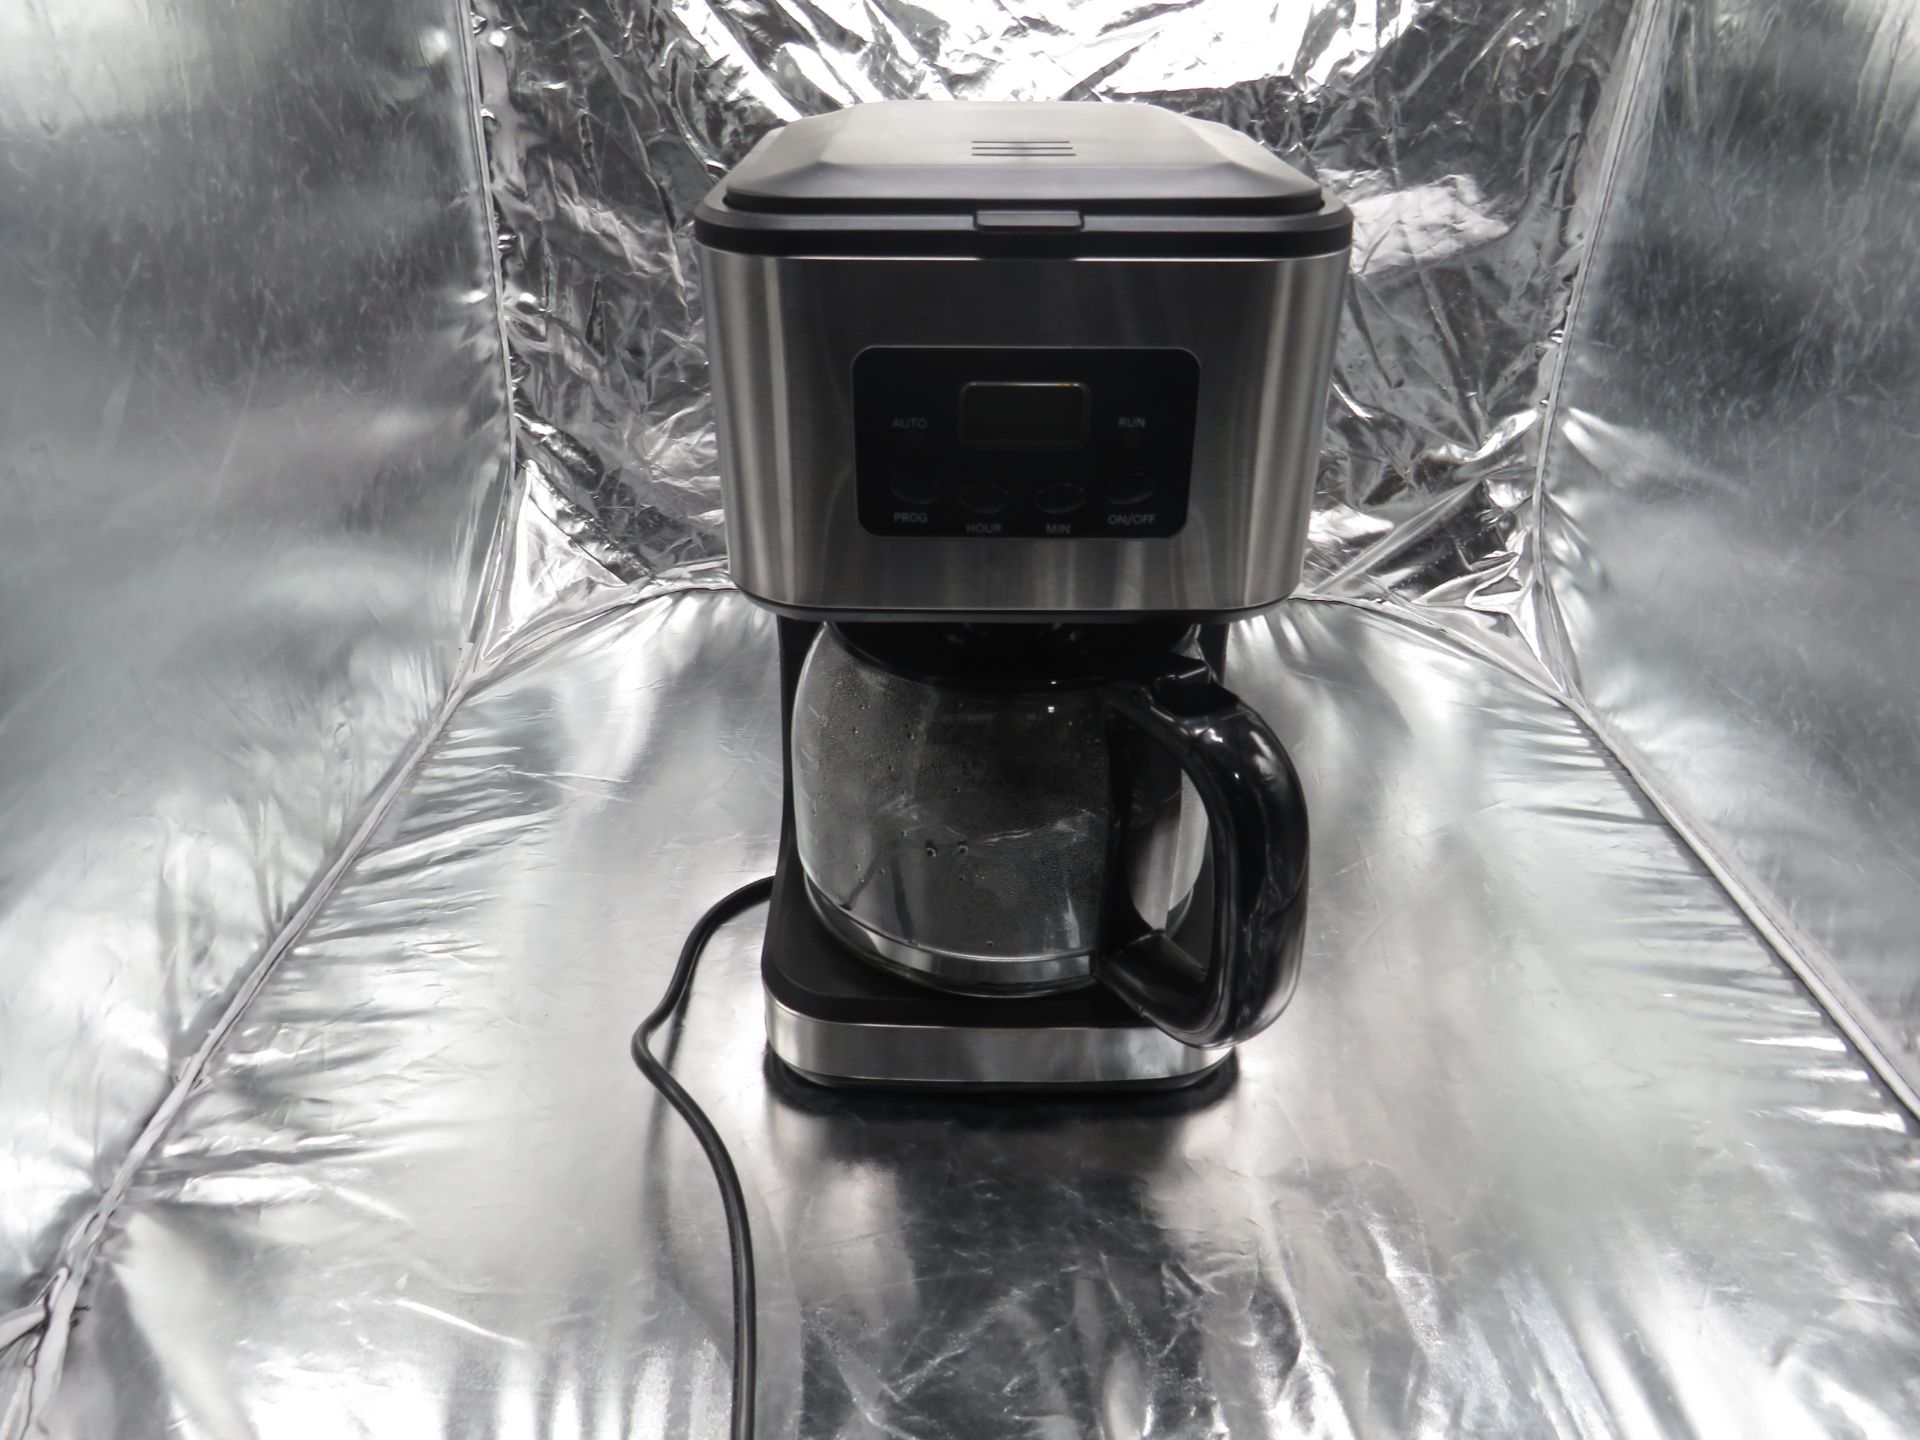 Morrisons Filter coffee maker, working as in the water heats up and trickles through to the jug,